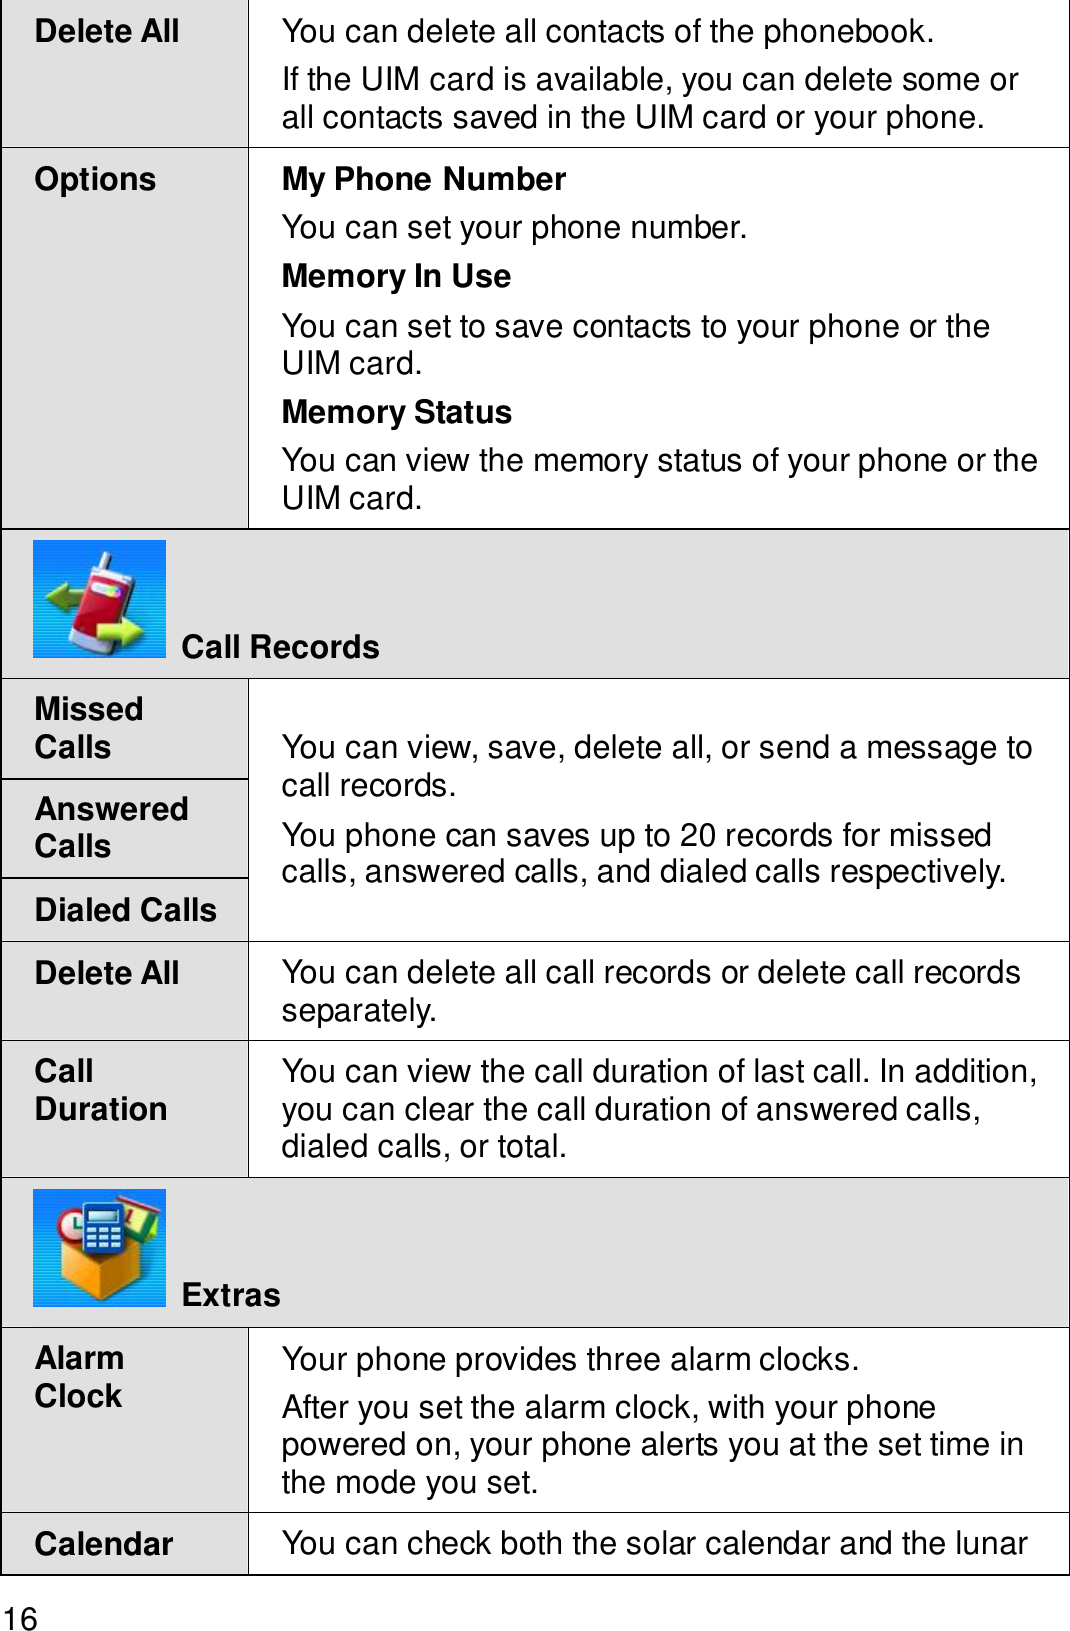  16 Delete All  You can delete all contacts of the phonebook. If the UIM card is available, you can delete some or all contacts saved in the UIM card or your phone. Options  My Phone Number You can set your phone number. Memory In Use You can set to save contacts to your phone or the UIM card. Memory Status You can view the memory status of your phone or the UIM card.  Call Records Missed Calls Answered Calls Dialed Calls You can view, save, delete all, or send a message to call records. You phone can saves up to 20 records for missed calls, answered calls, and dialed calls respectively. Delete All  You can delete all call records or delete call records separately. Call Duration  You can view the call duration of last call. In addition, you can clear the call duration of answered calls, dialed calls, or total.  Extras Alarm Clock  Your phone provides three alarm clocks. After you set the alarm clock, with your phone powered on, your phone alerts you at the set time in the mode you set. Calendar  You can check both the solar calendar and the lunar 